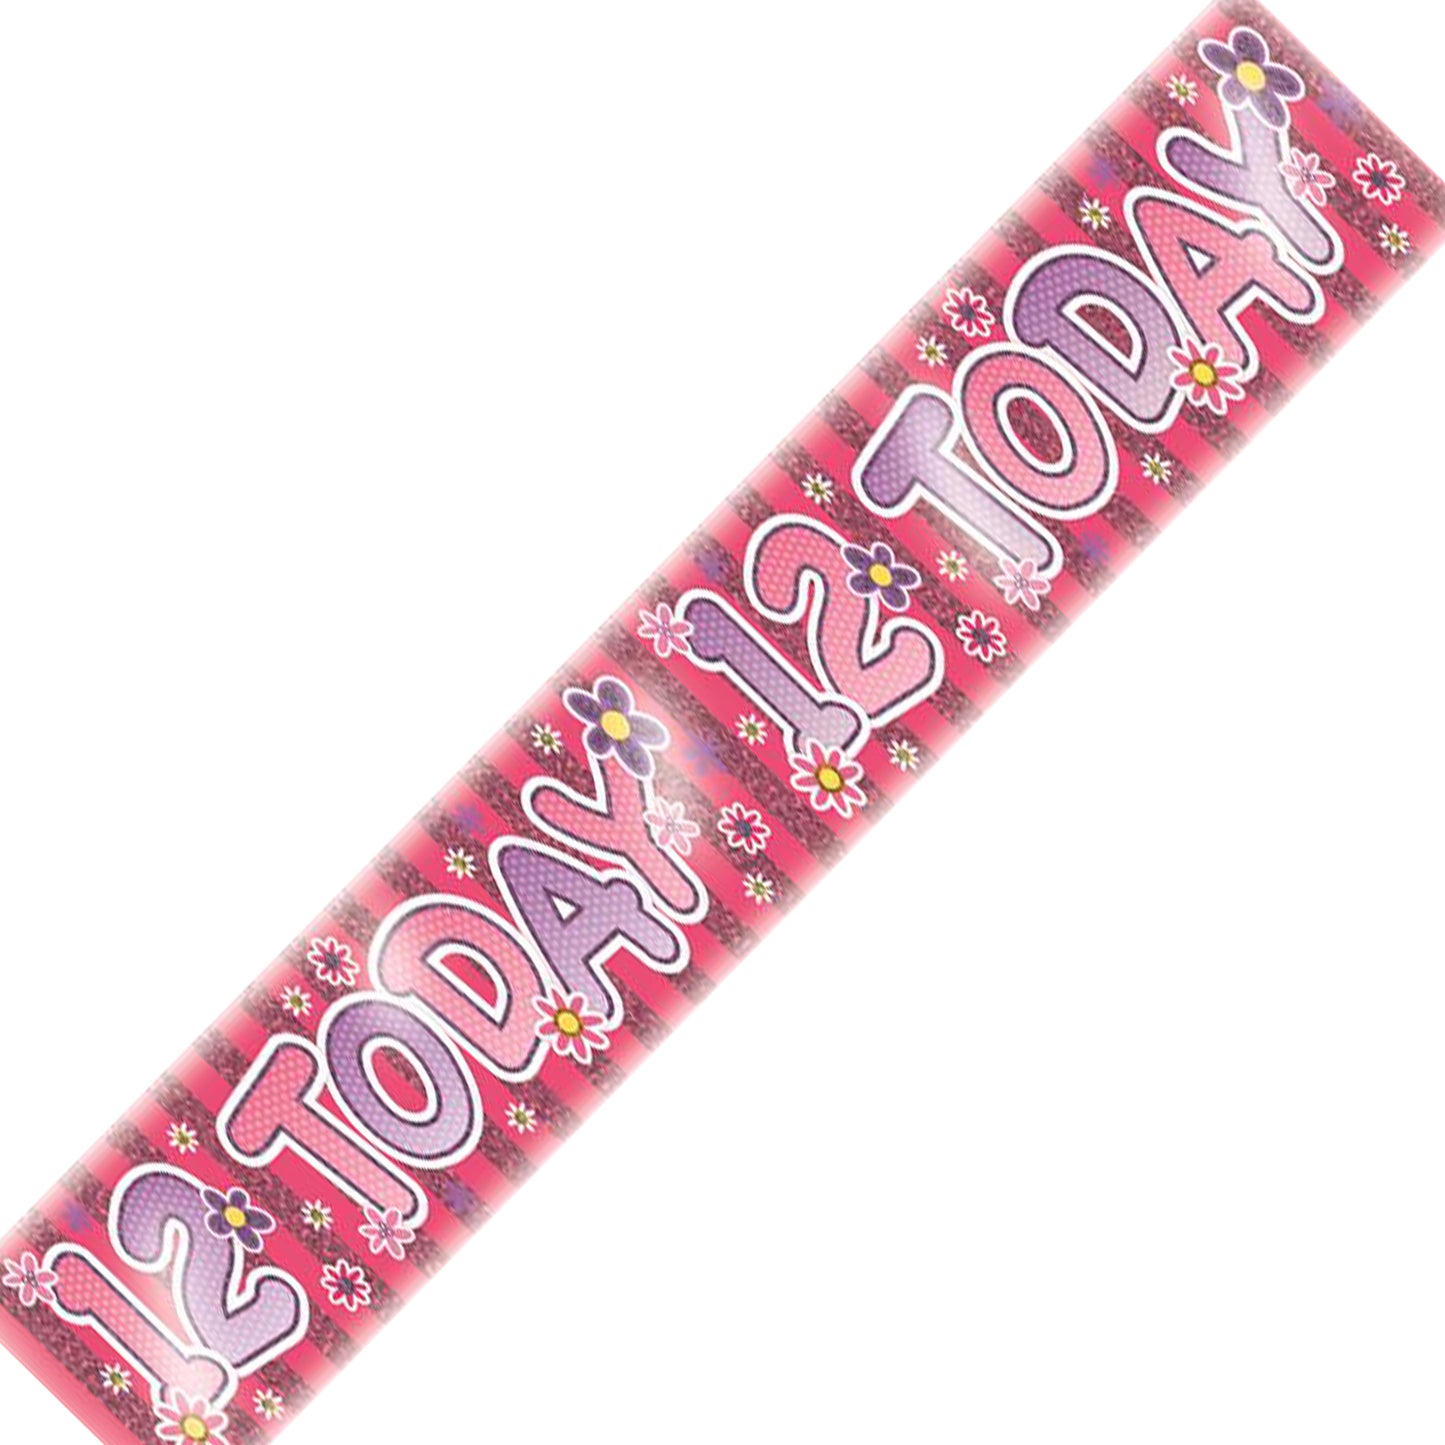 Age 12 Birthday Banner Pink, Purple And Silver Holographic Recyclable 12th Birthday Party Banner